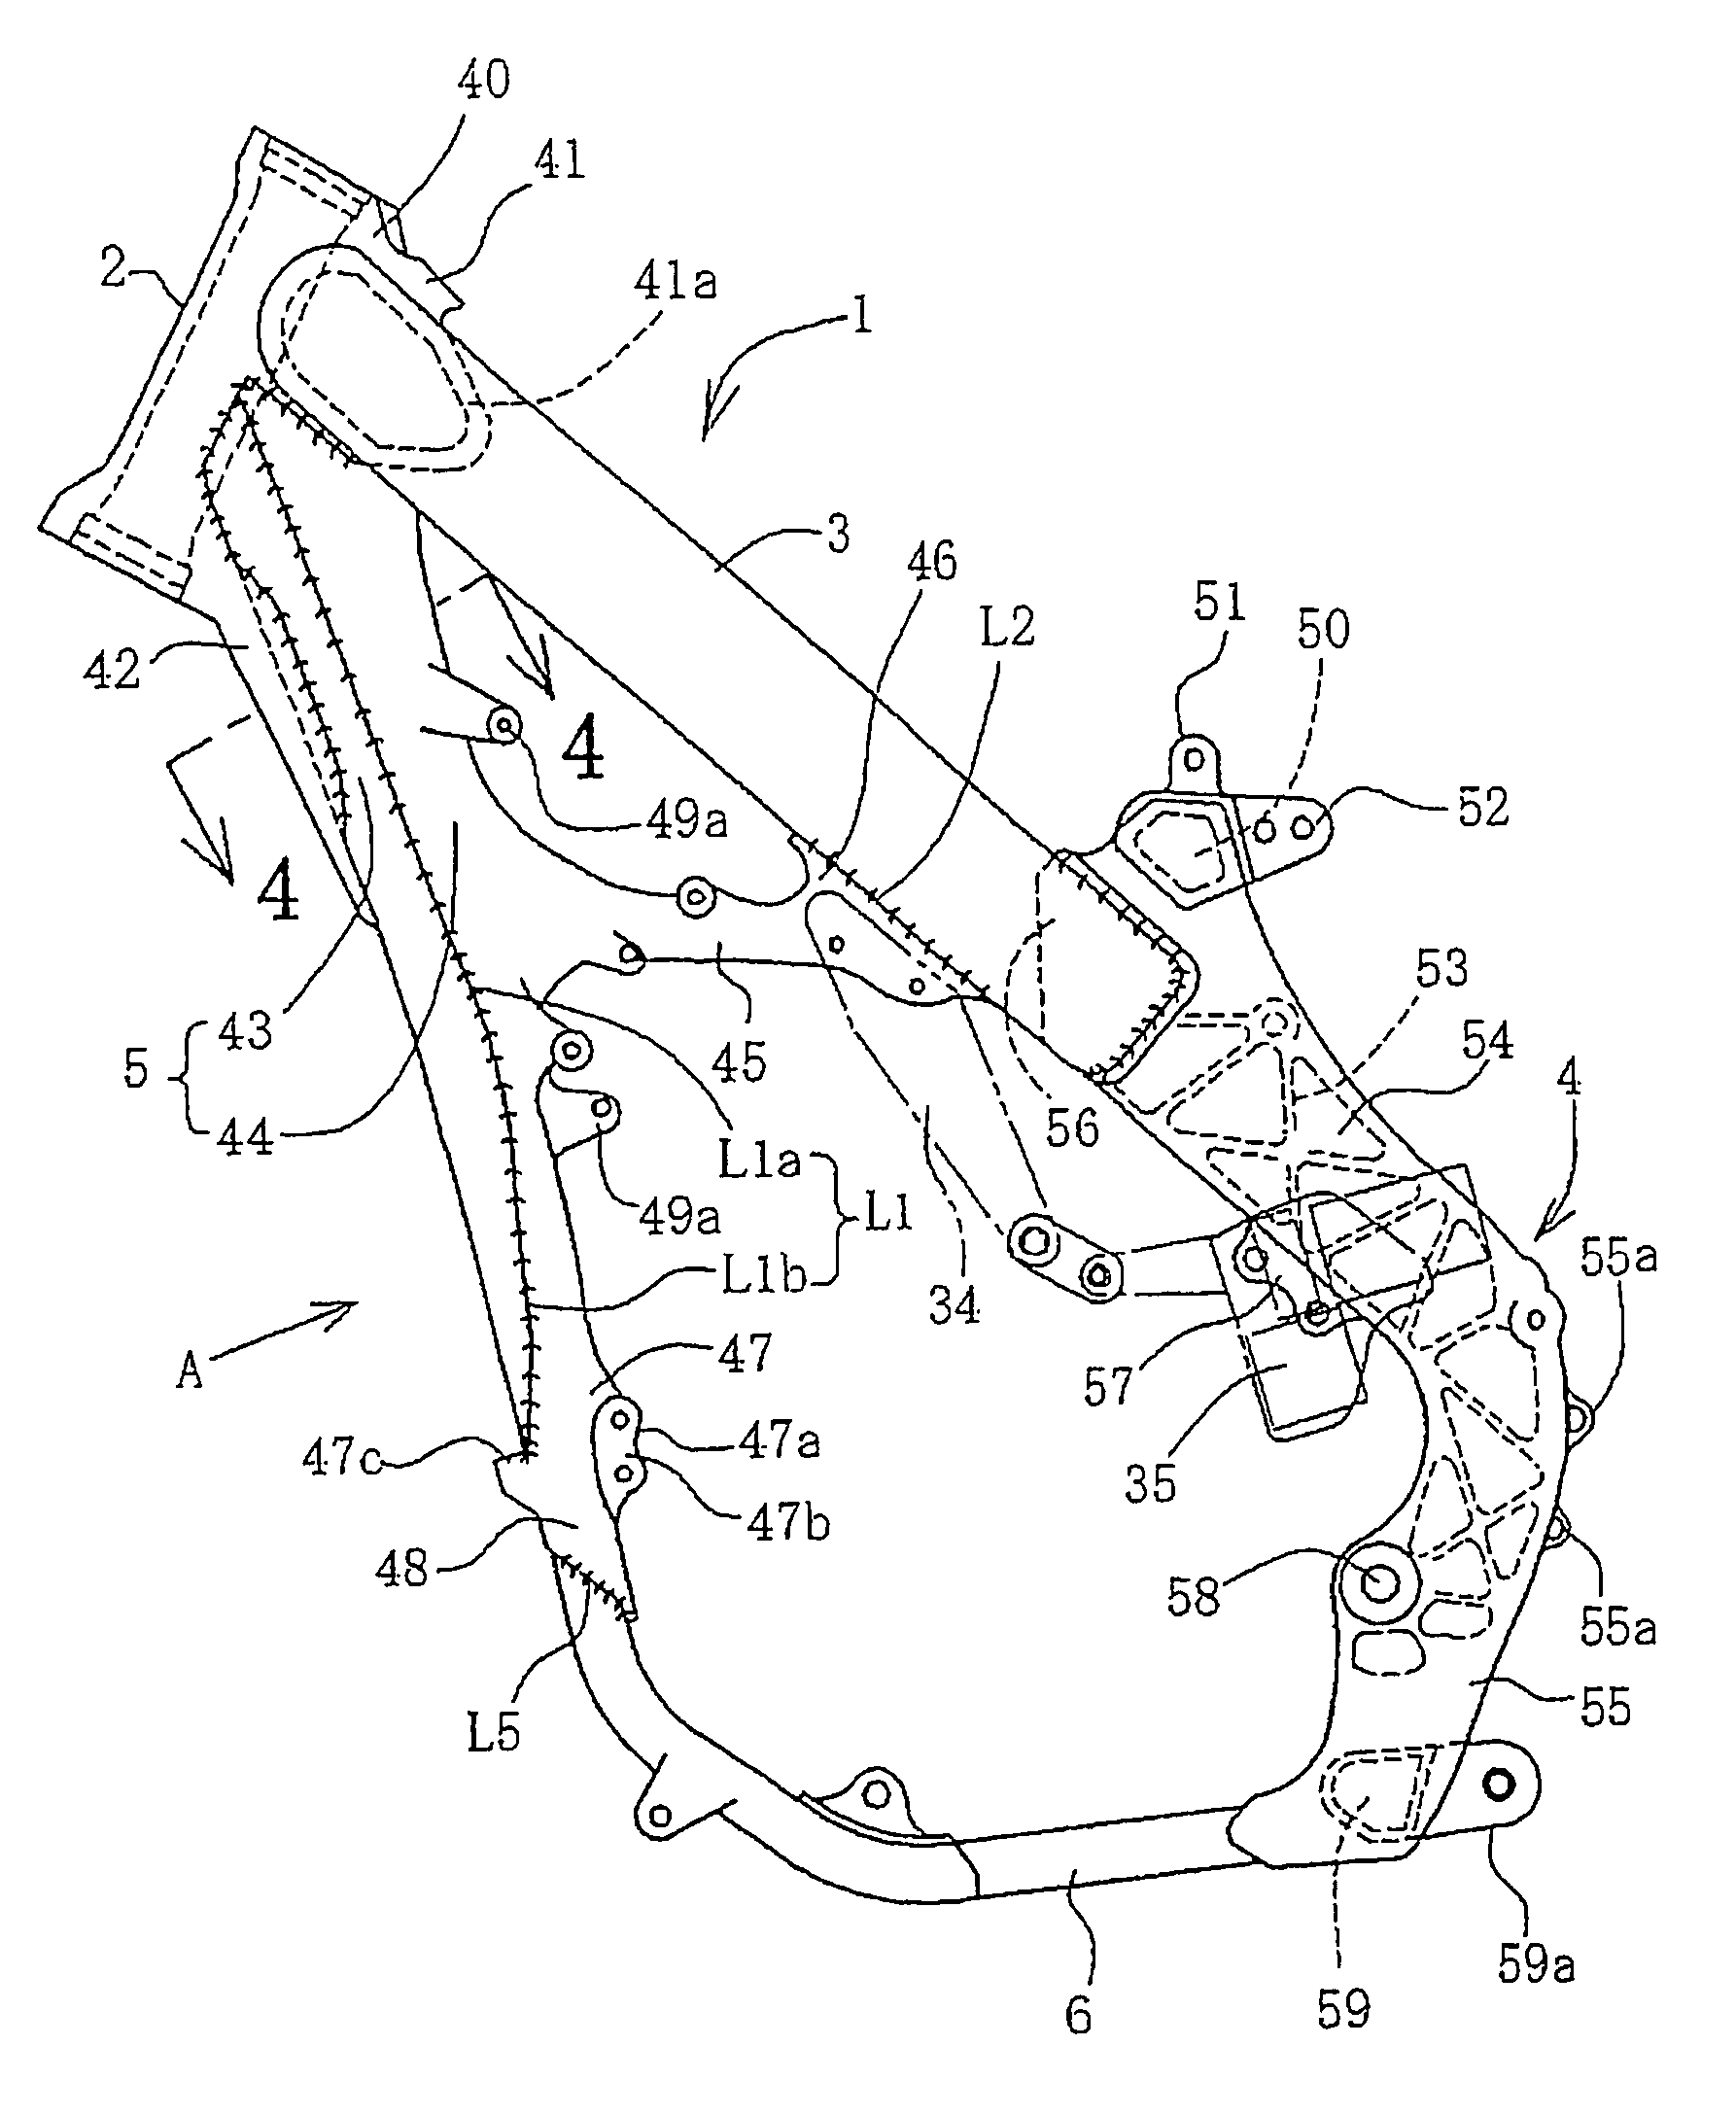 Motorcycle body frame structure